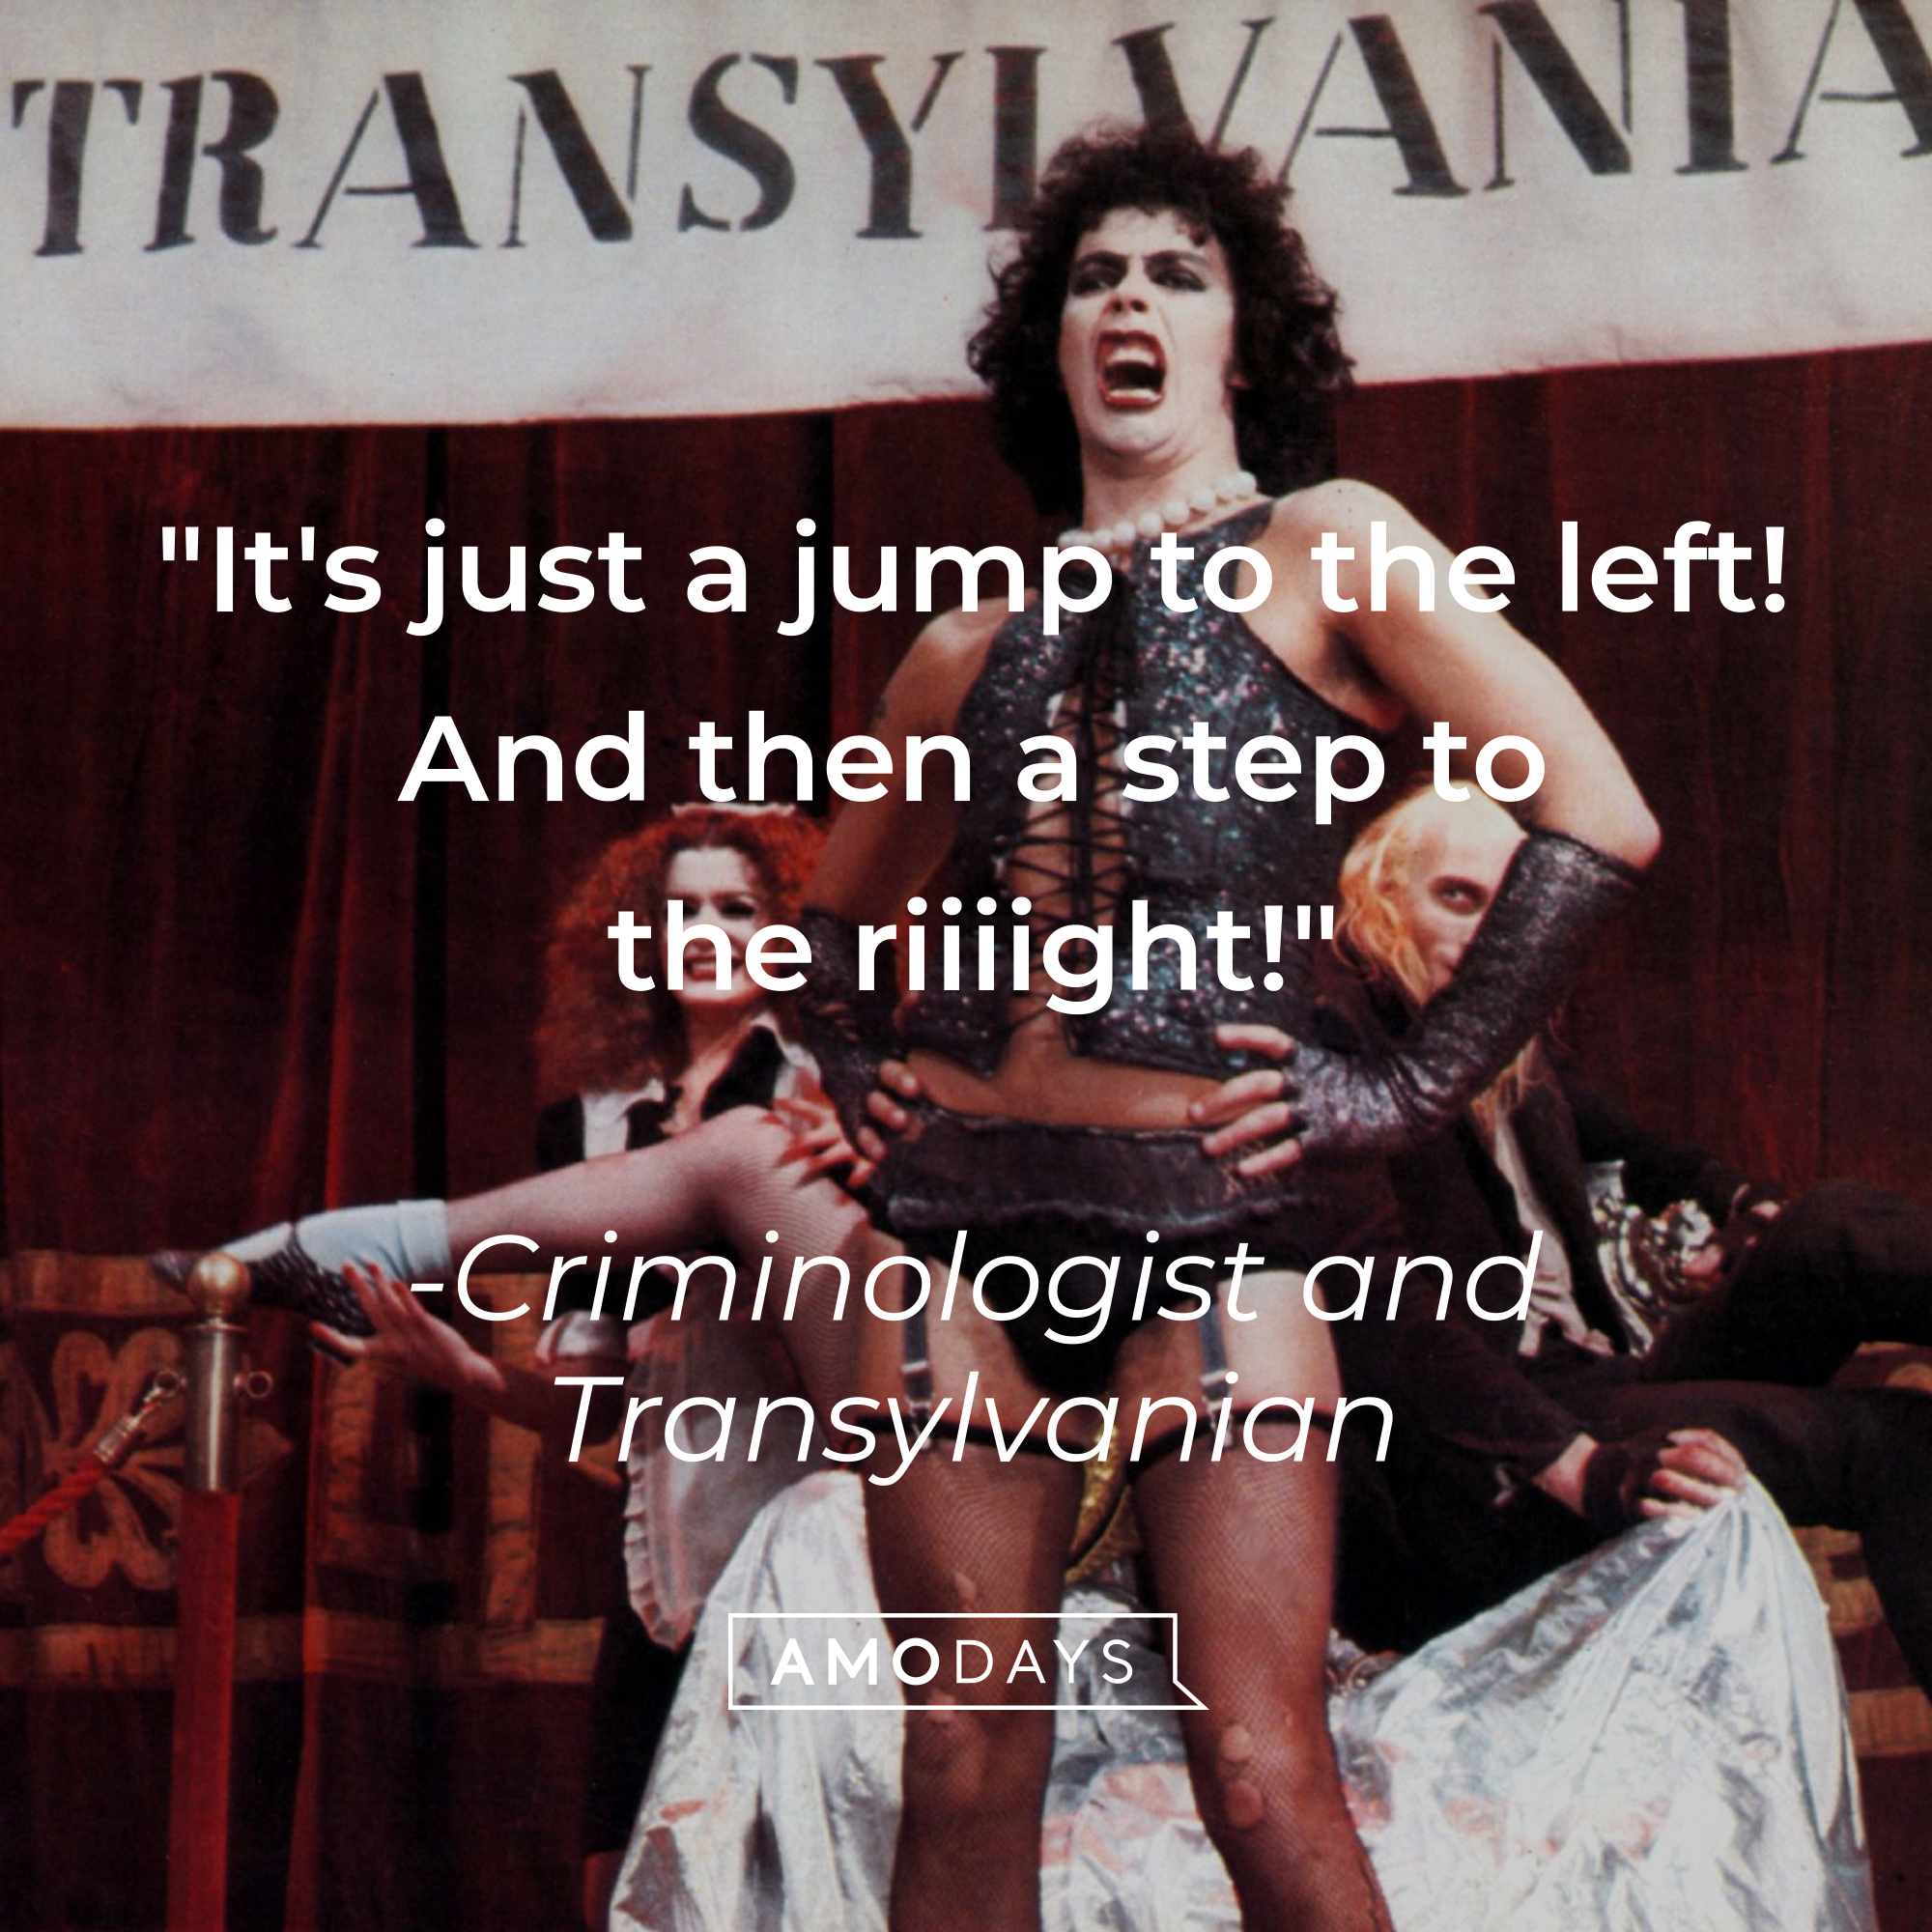 Criminologist and Transylvanian's quote: "It's just a jump to the left! And then a step to the riiiight!"  | Source: Getty Images